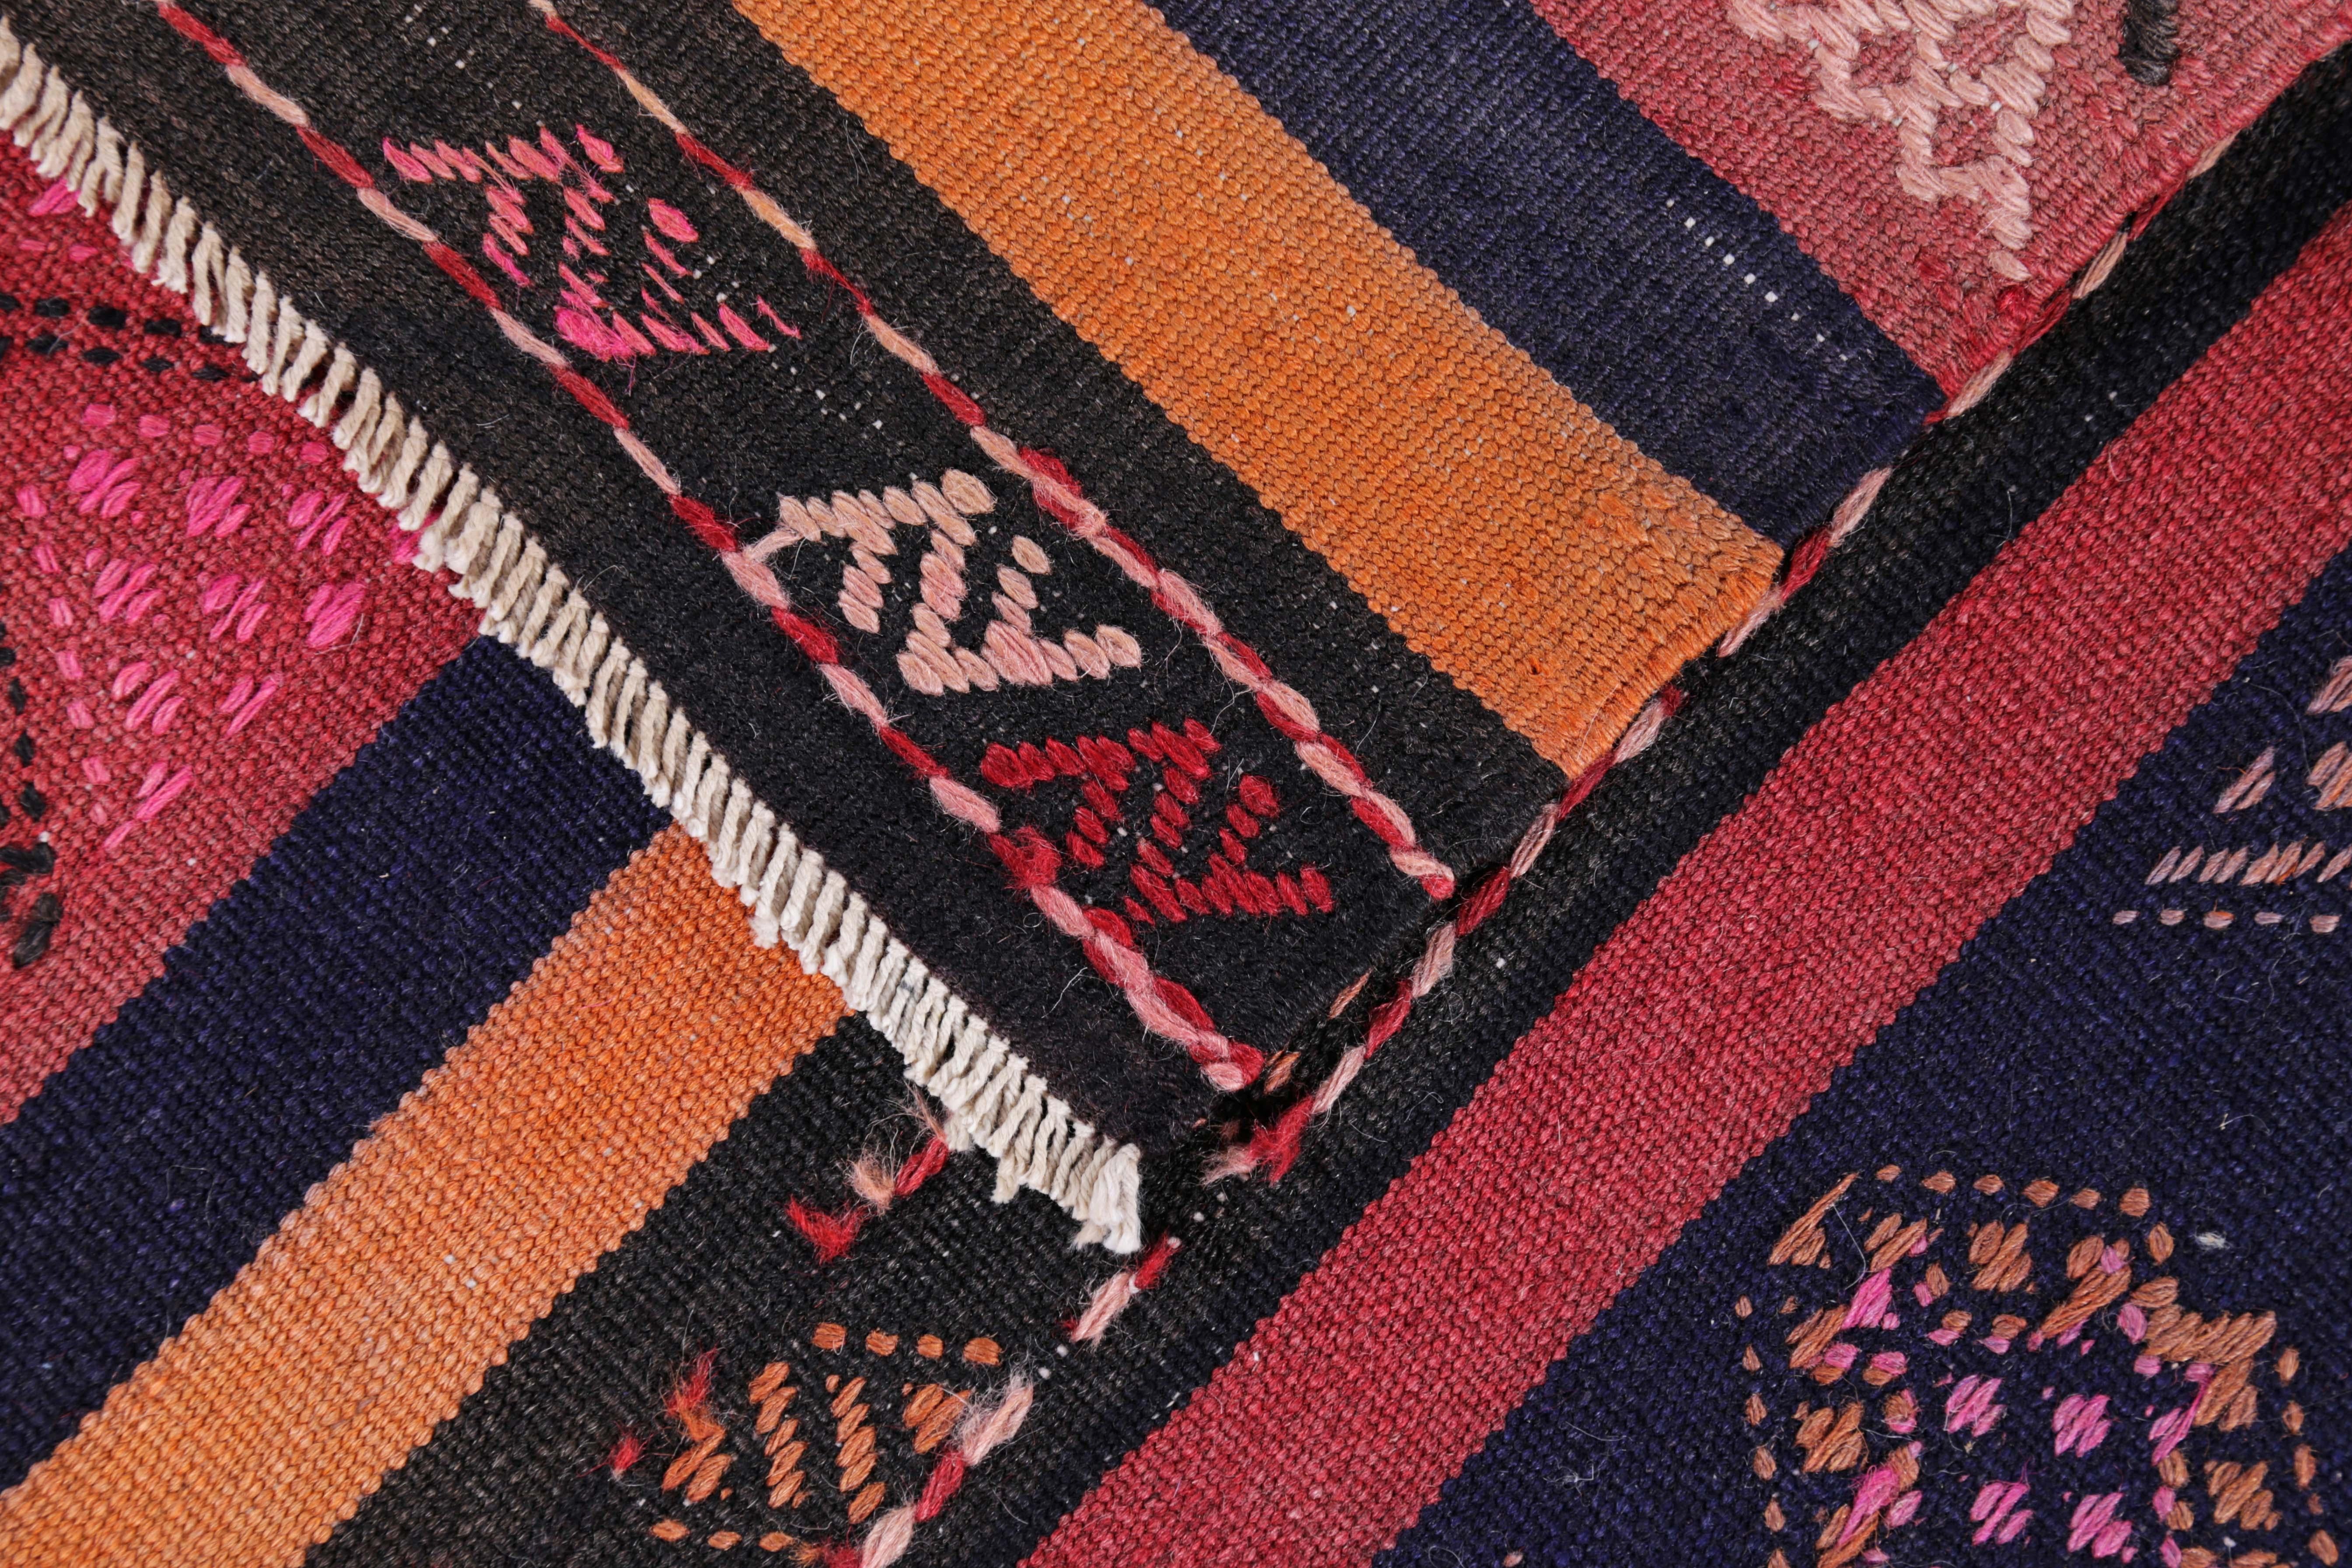 Contemporary Turkish Kilim Runner Rug with Orange, Blue, Red and Black Tribal Diamonds For Sale